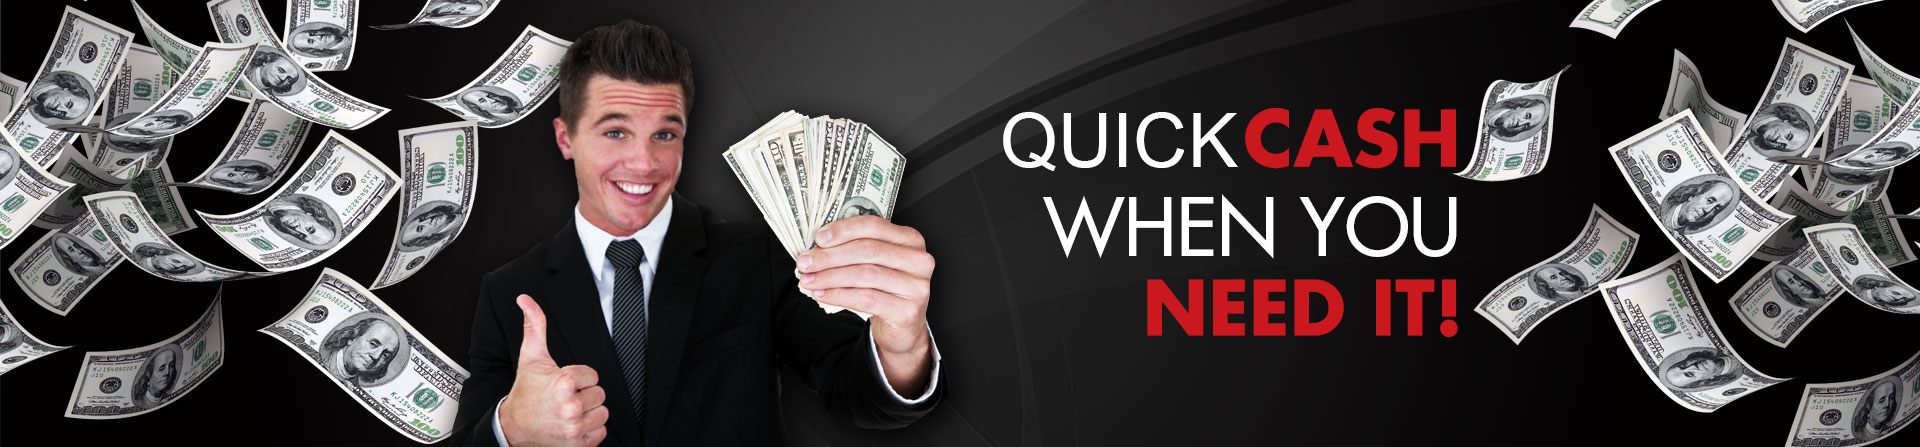 QUICK CASH WHEN YOU NEED IT!